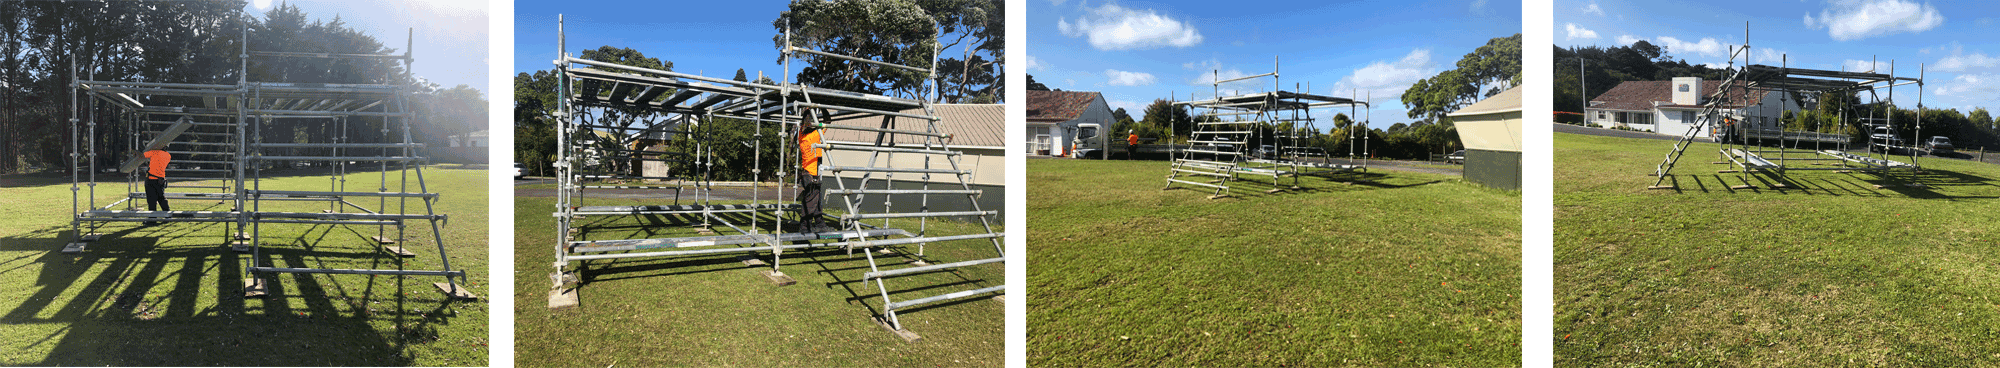 all scaffolding scout jamboree auckland